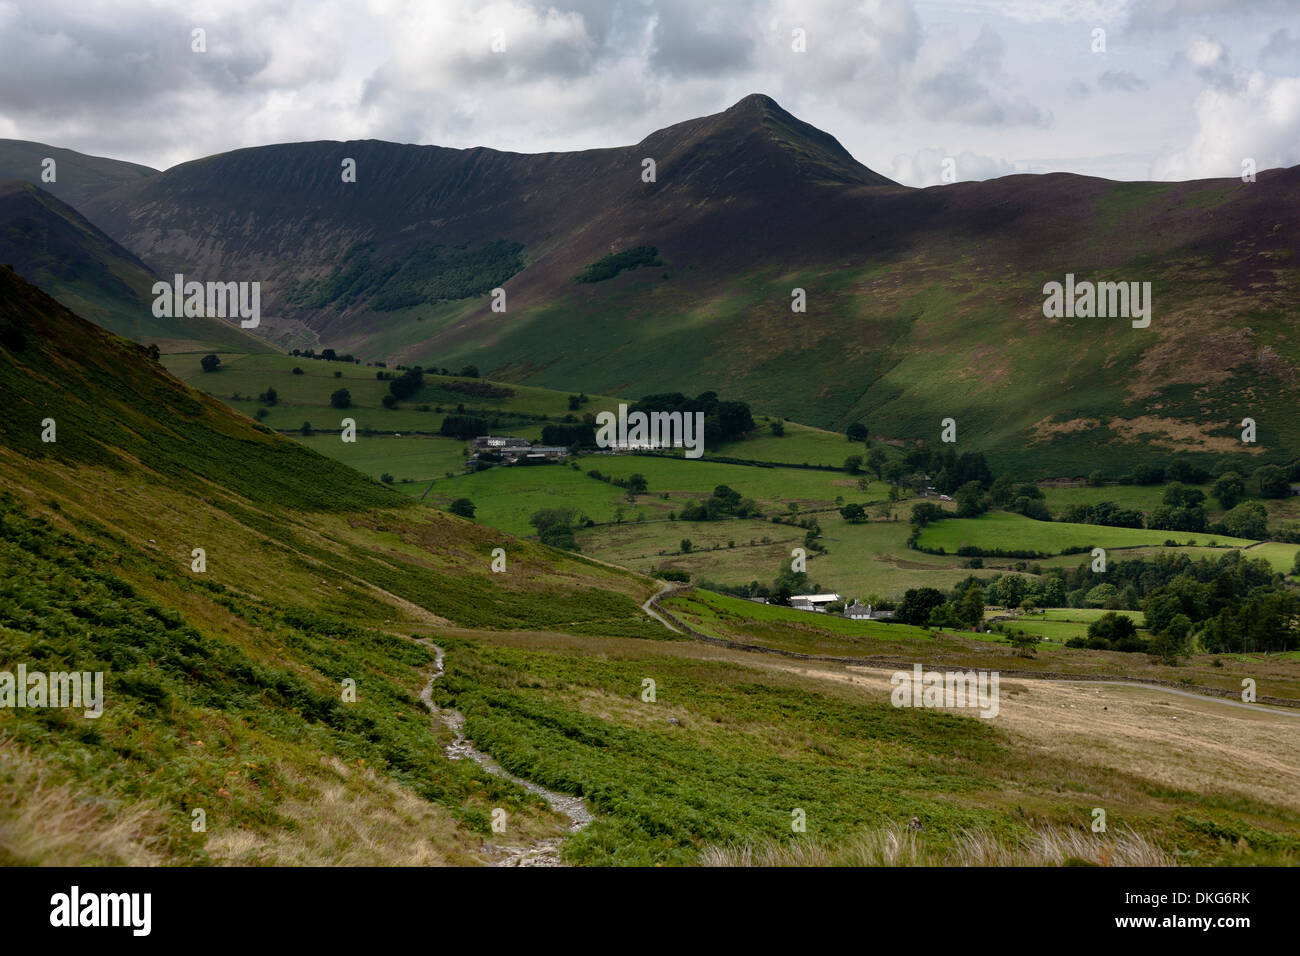 A path winds into a dramatic scene of hills, mountains, fields and trees. Lake District, UK. Stock Photo